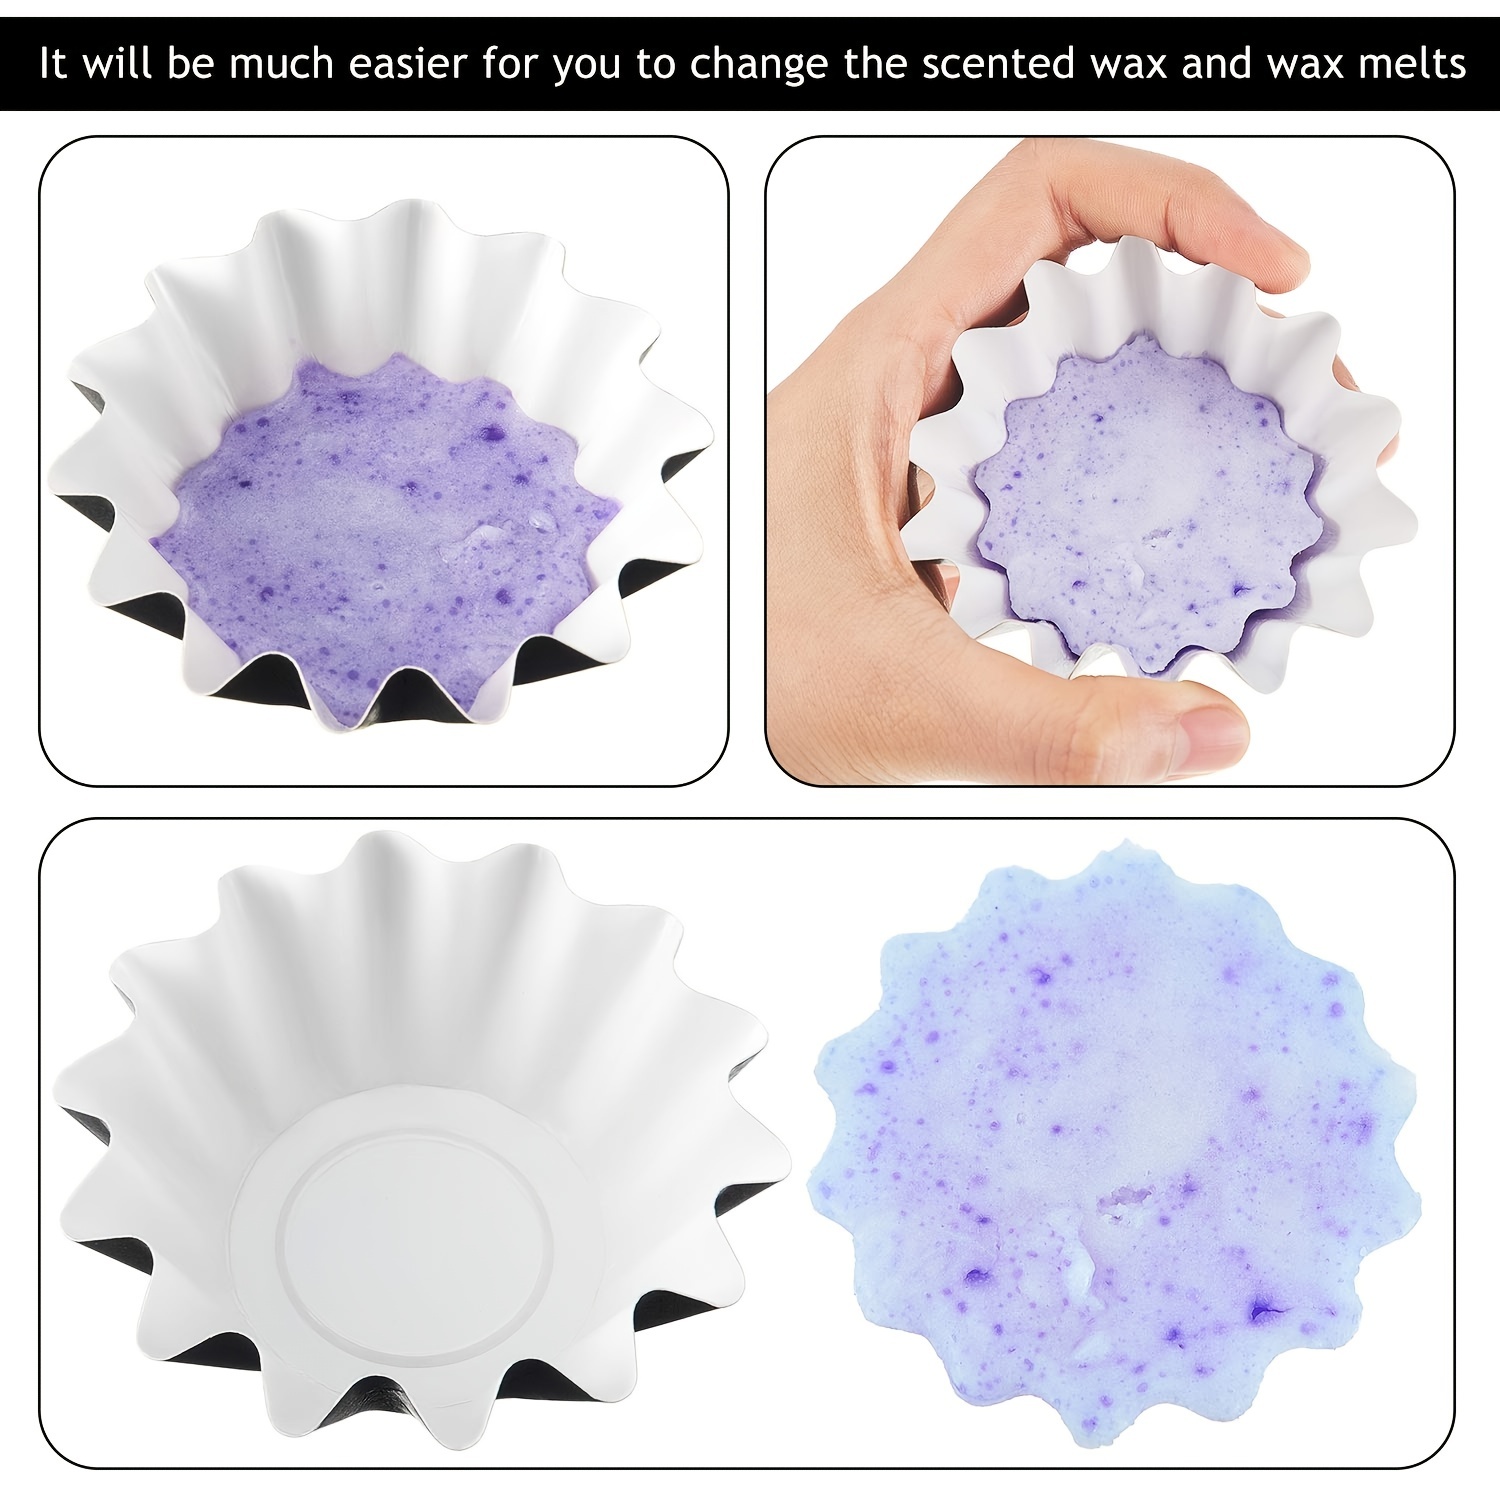 Wax Melt Warmer Liners Reusable 50 PCS Leakproof Wax Tray Candle